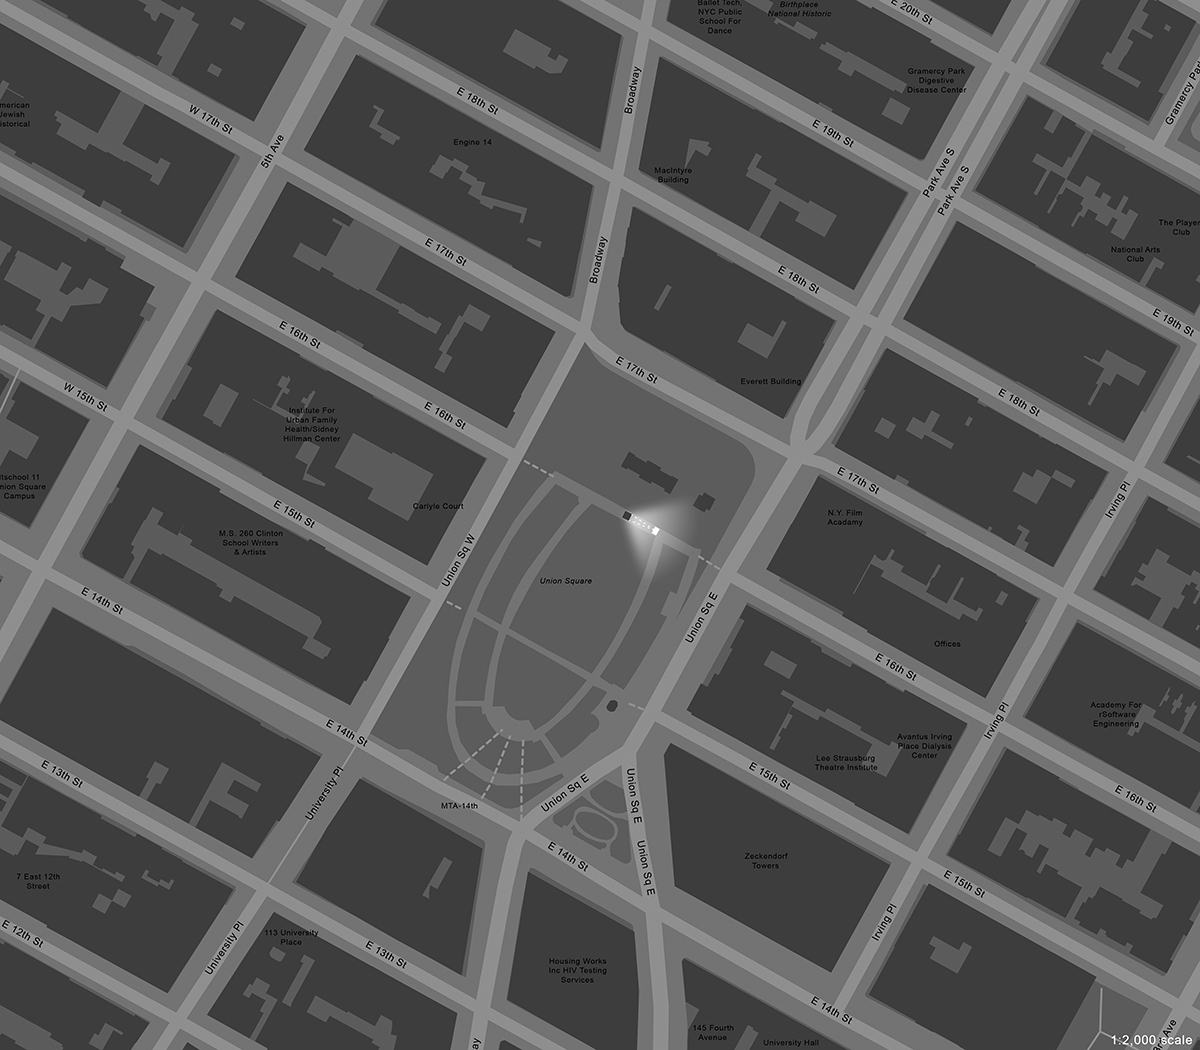 Aerial map of a section of Manhattan showing Union Square in the middle, with a grid of streets and avenues on all sides. In the northern part of Union square there is a highlighted point showing the location of the Abraham Lincoln monument.